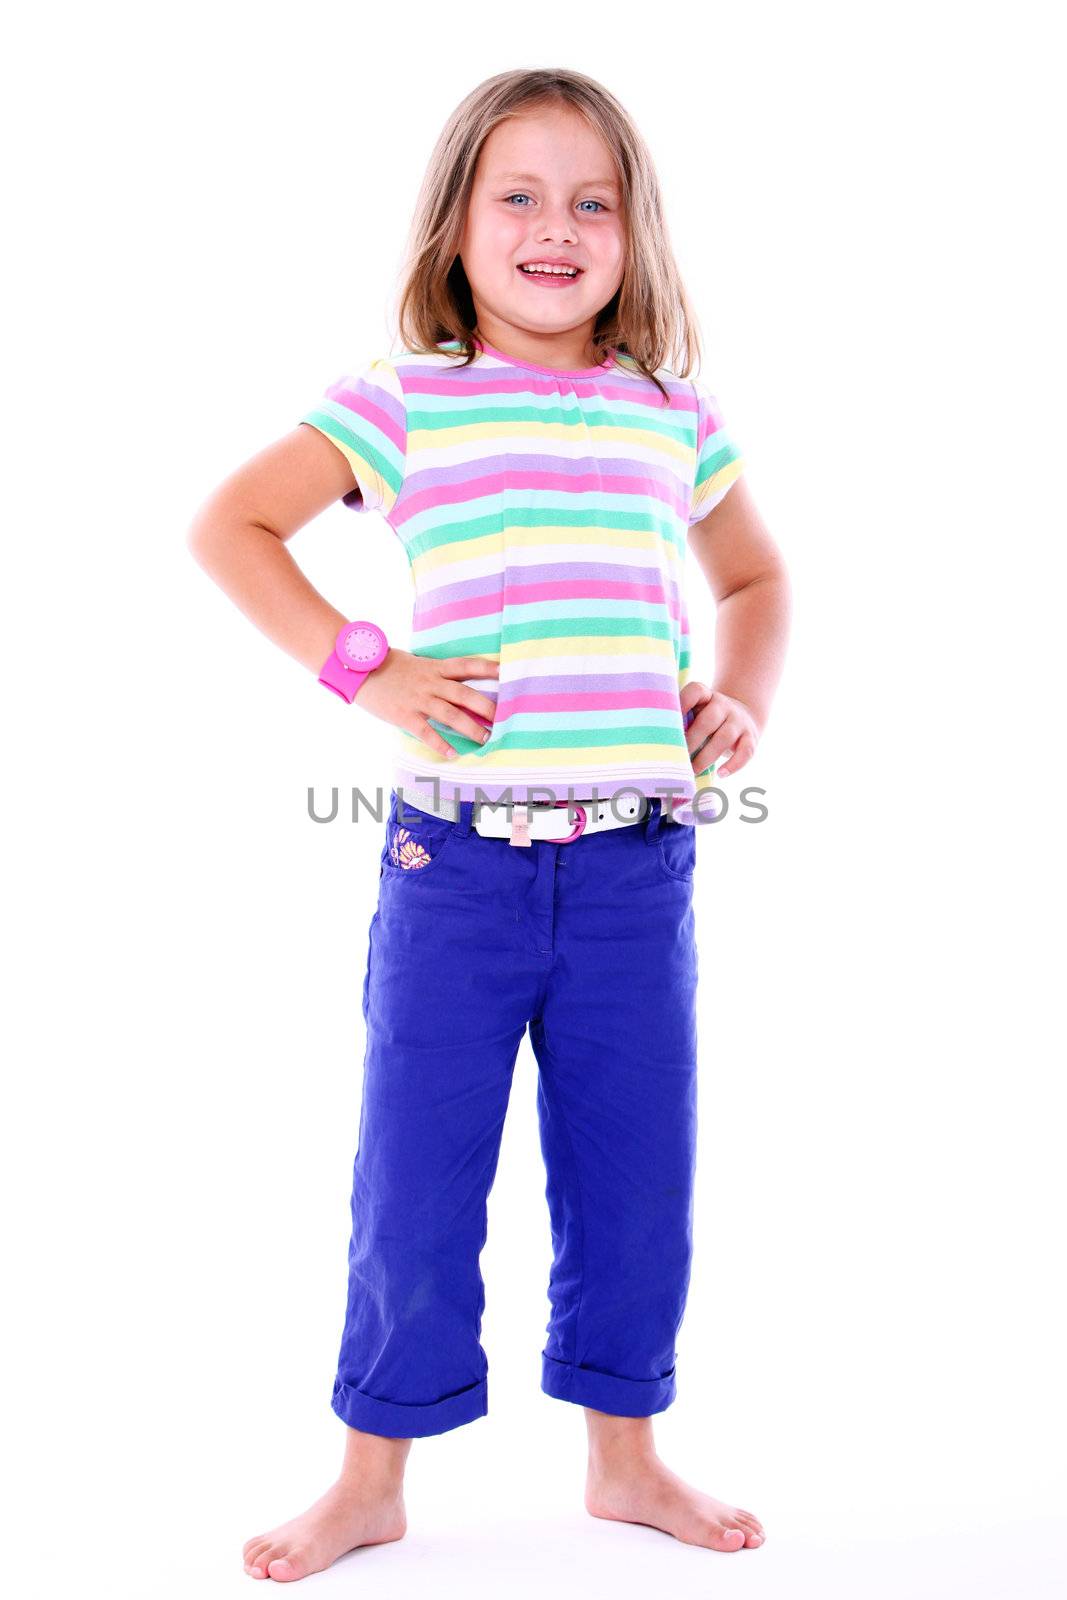 Little girl in colored t-shirt on white backgrund